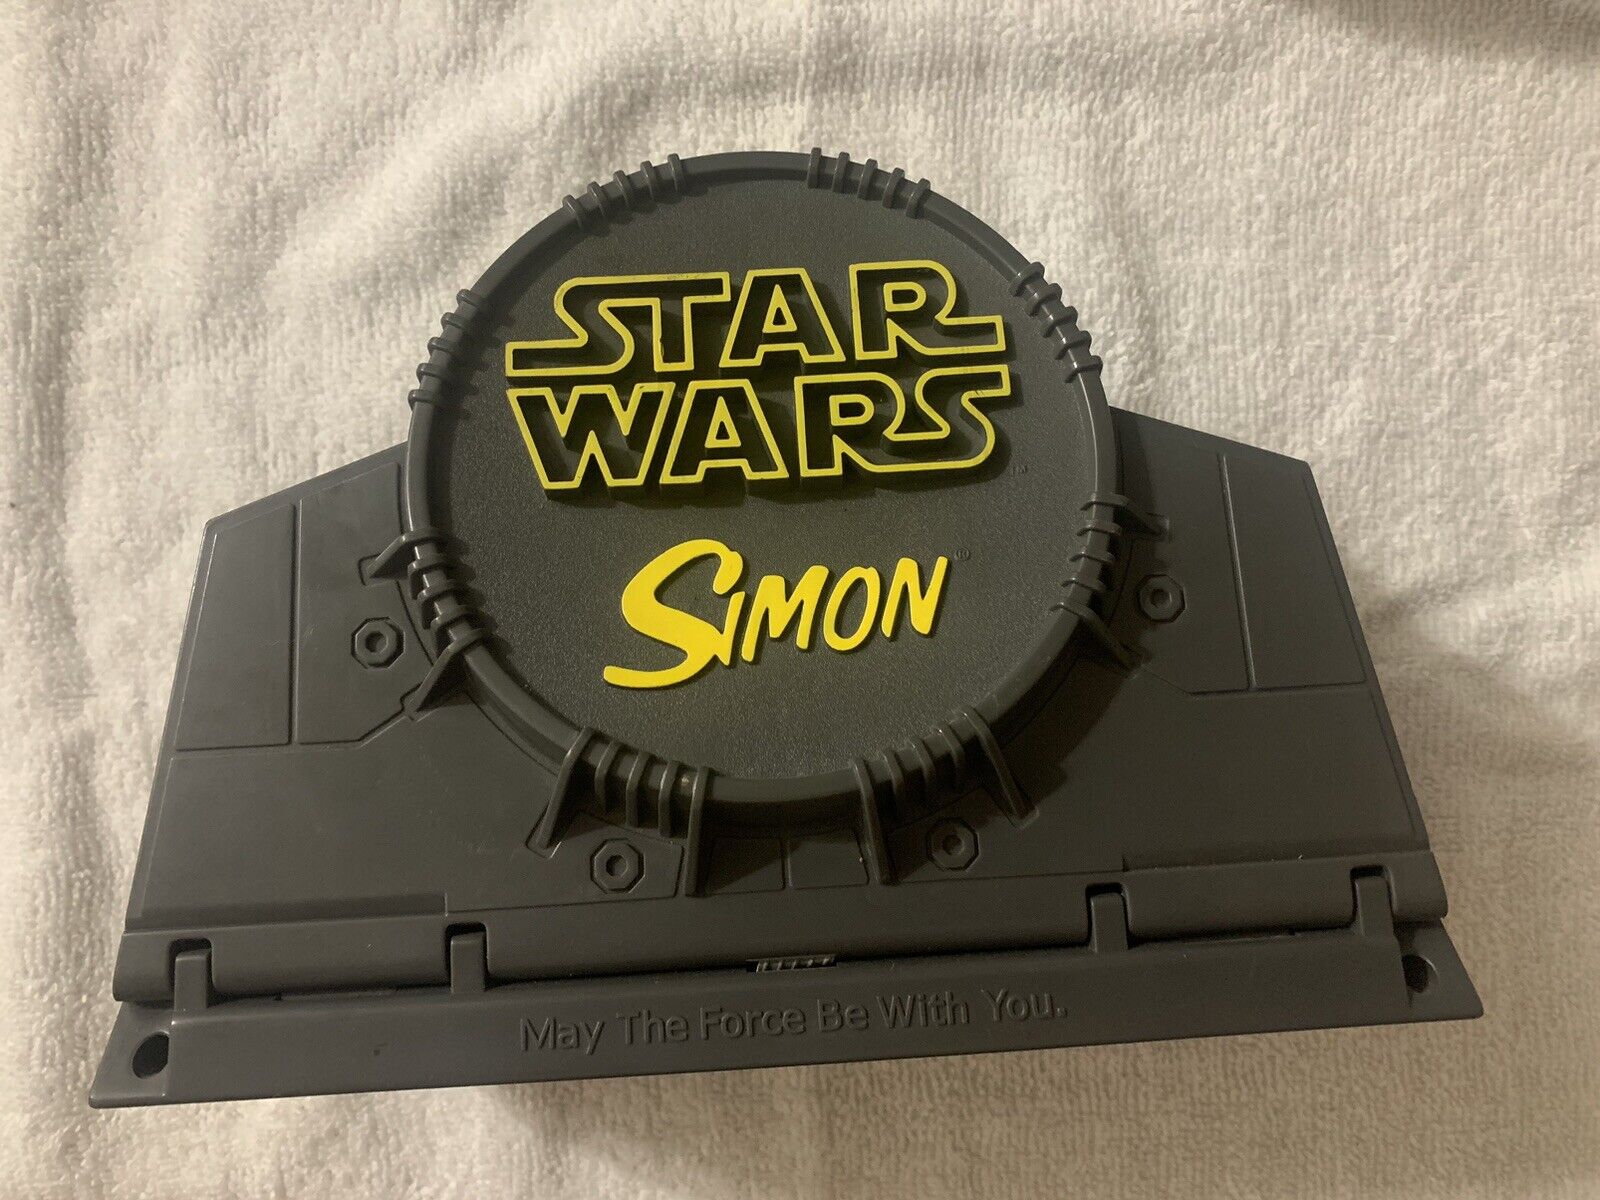 Vintage 1999 Hasbro Star Wars Episode 1 Simon Space Battle Game Tested Working